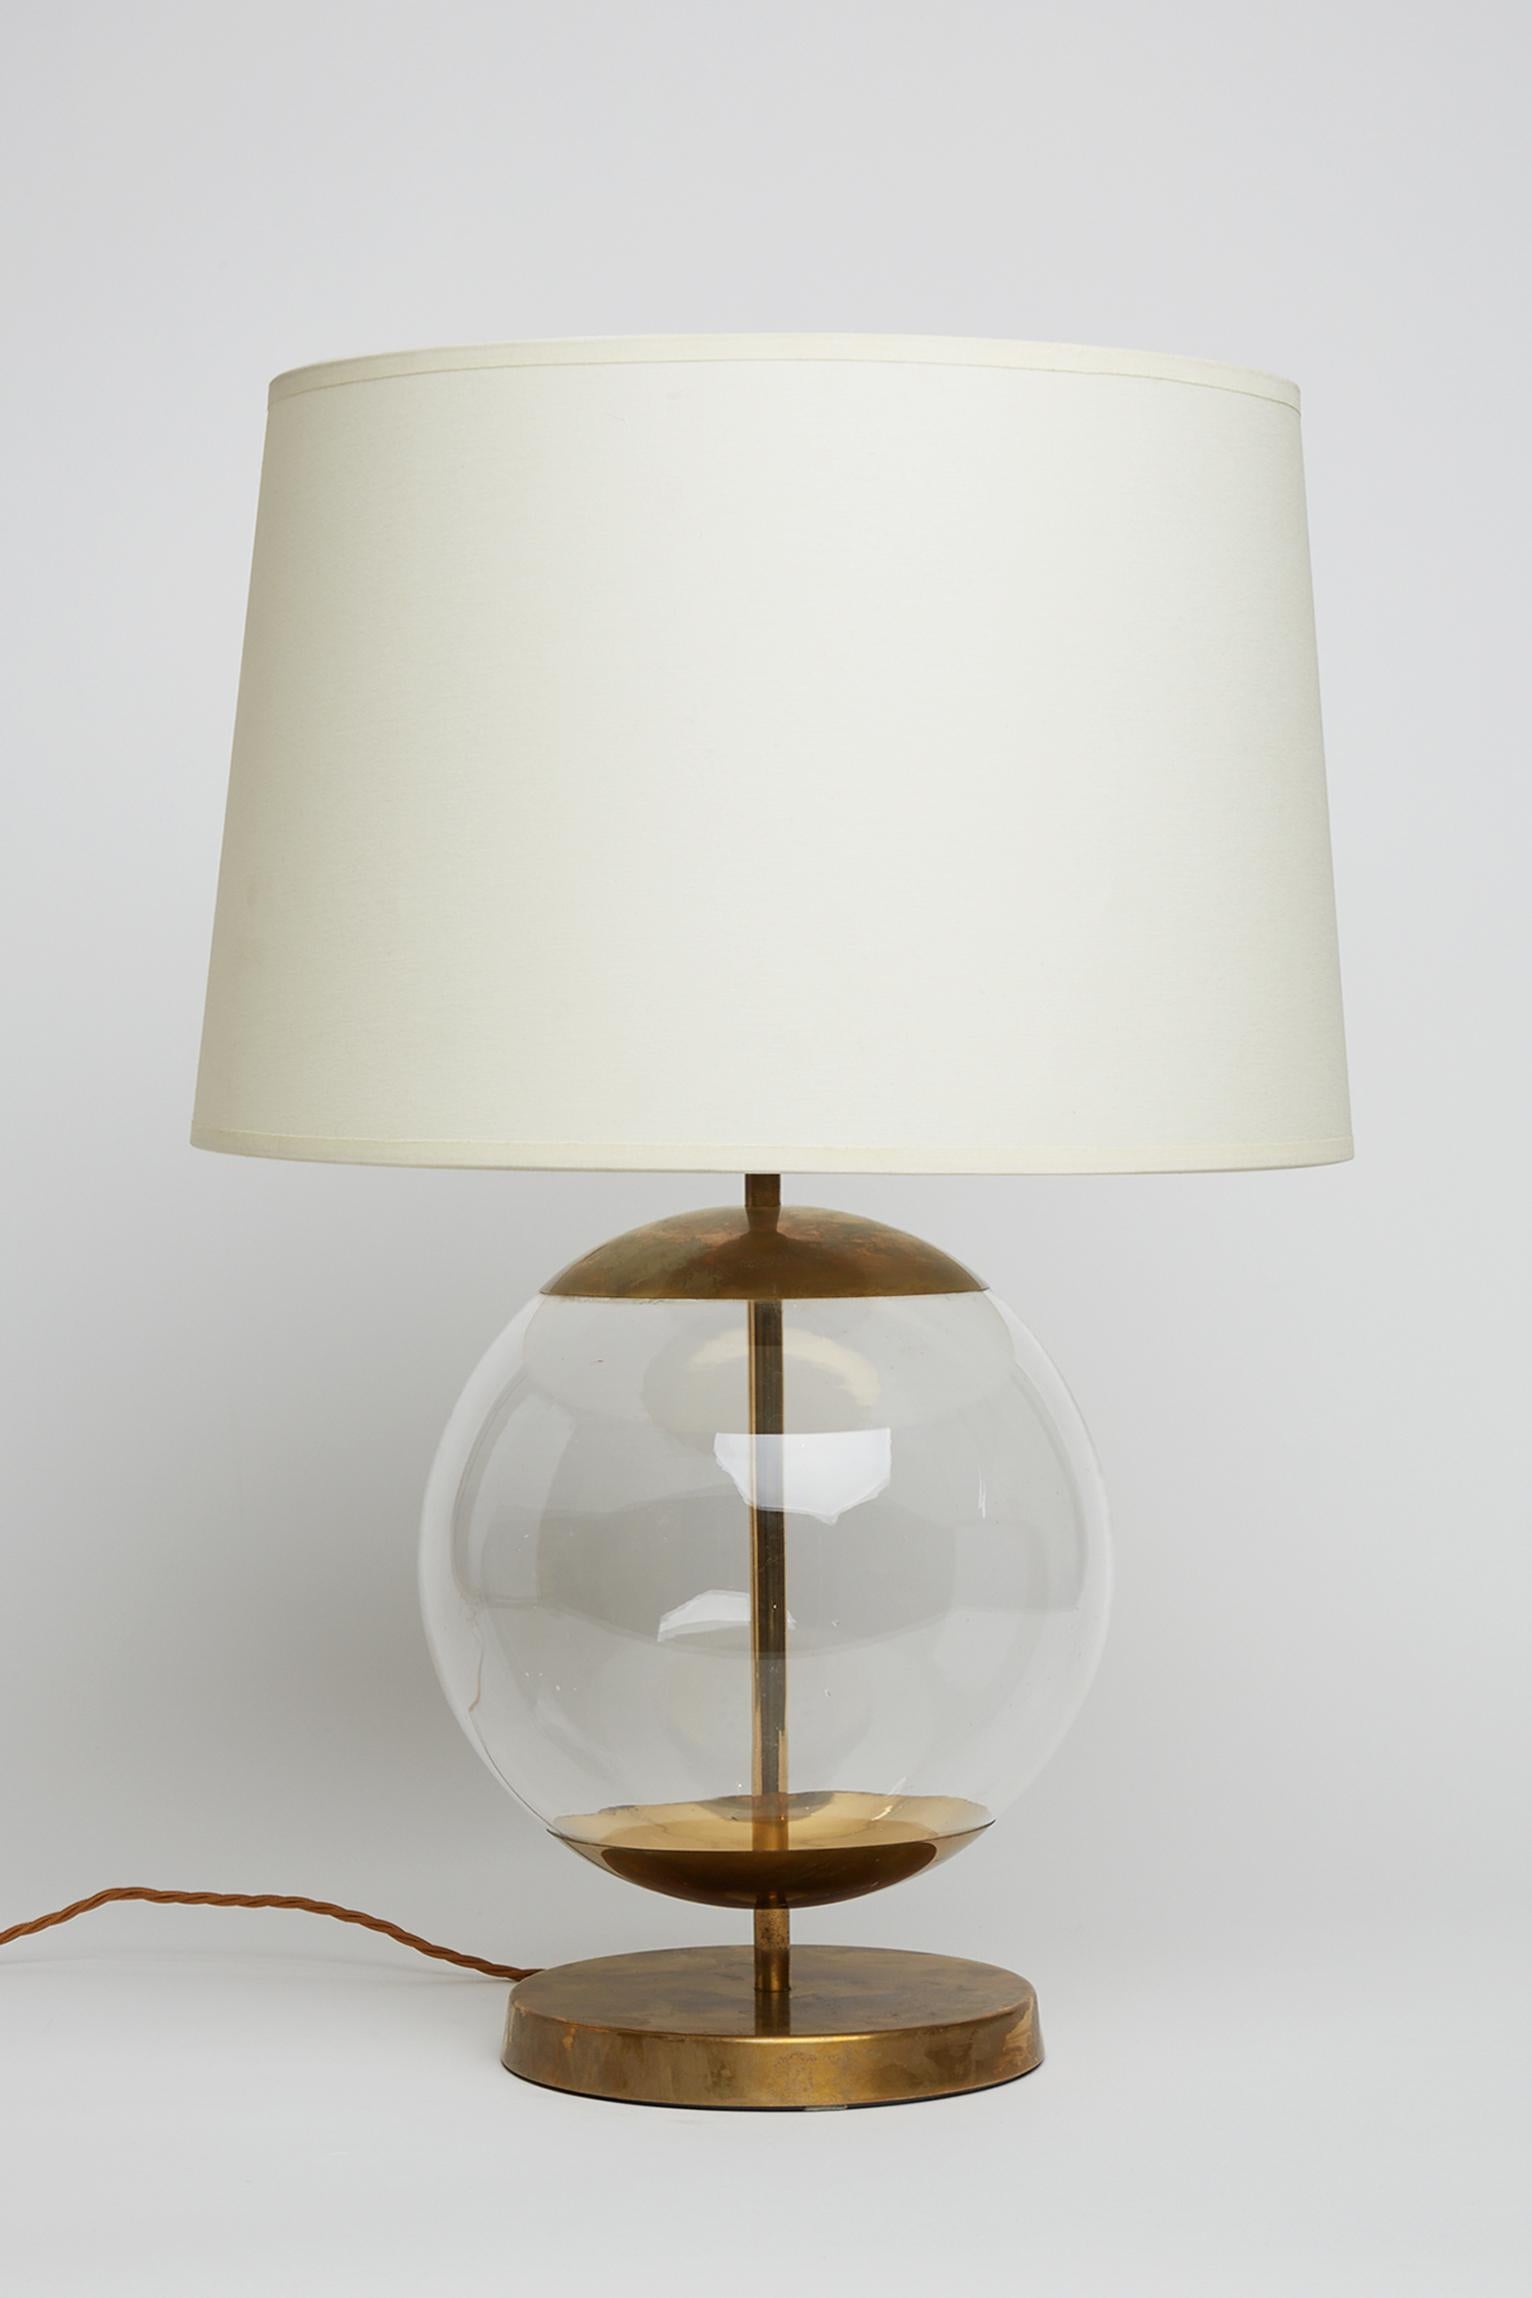 A brass and glass globe table lamp by Bergboms.
Sweden, Circa 1970.
With the shade: 60 cm high by 40 cm diameter.
Lamp base only: 40 cm high by 25 cm diameter.